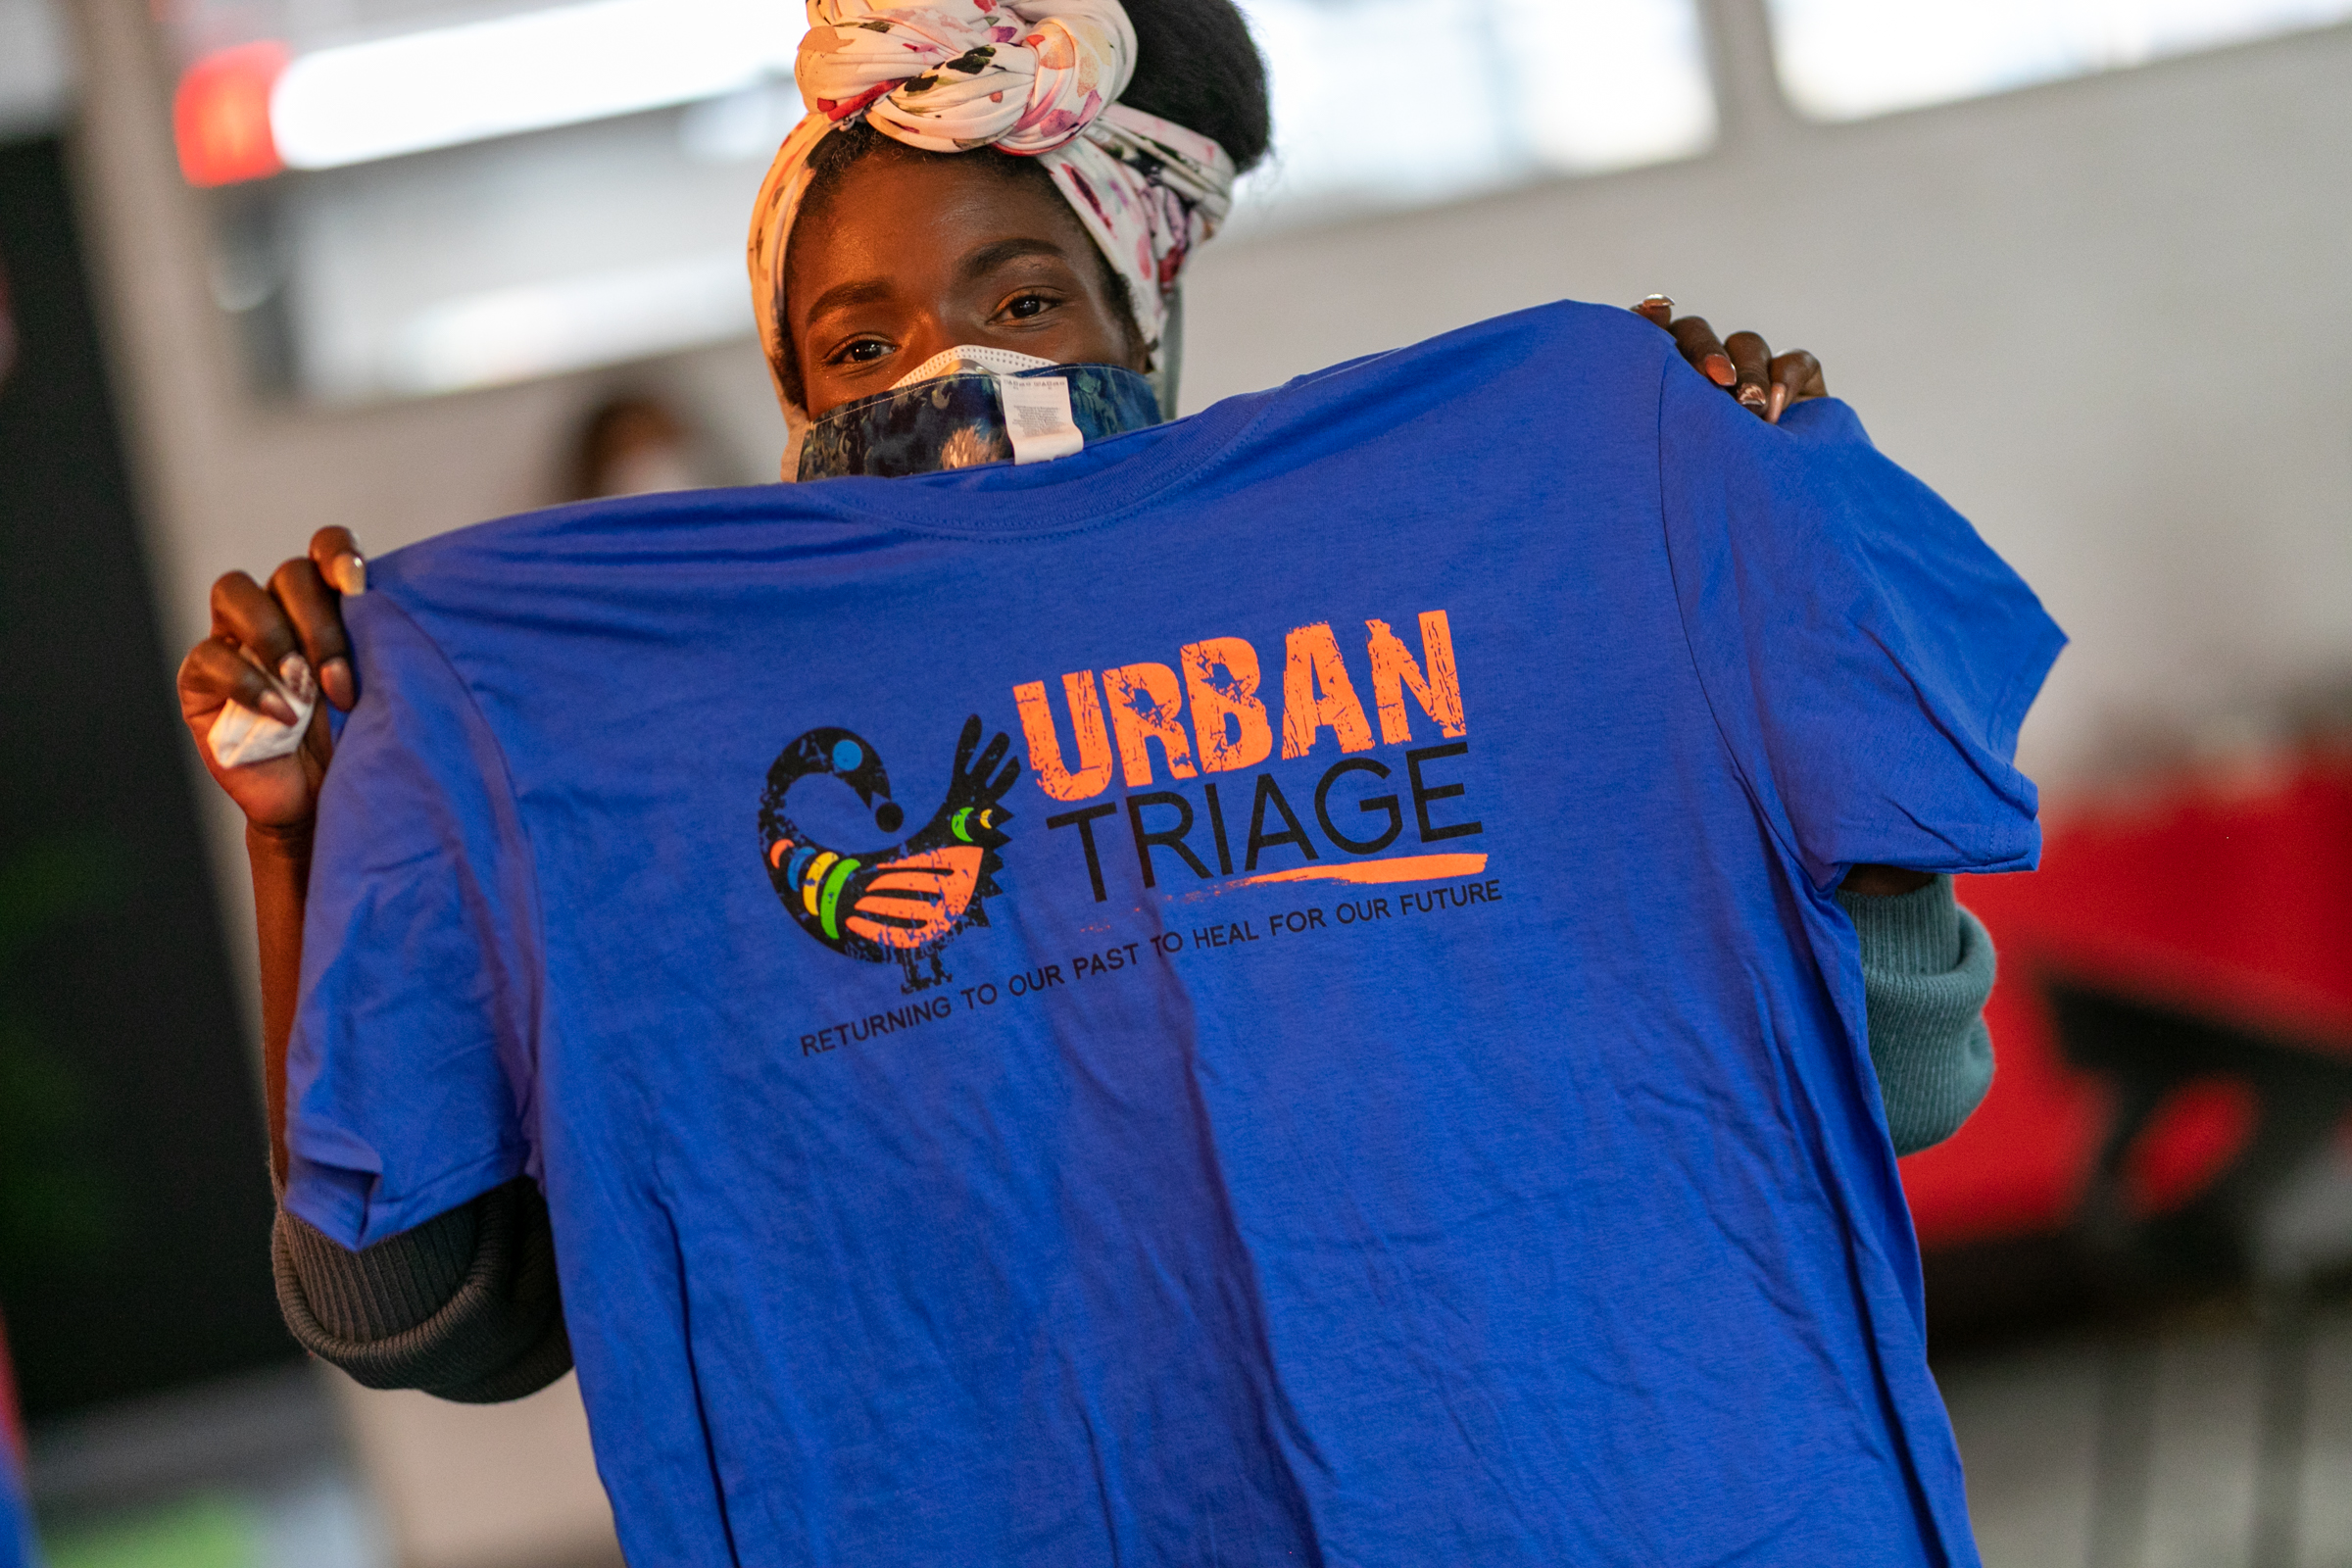 Urban Triage Youth Drop In Center